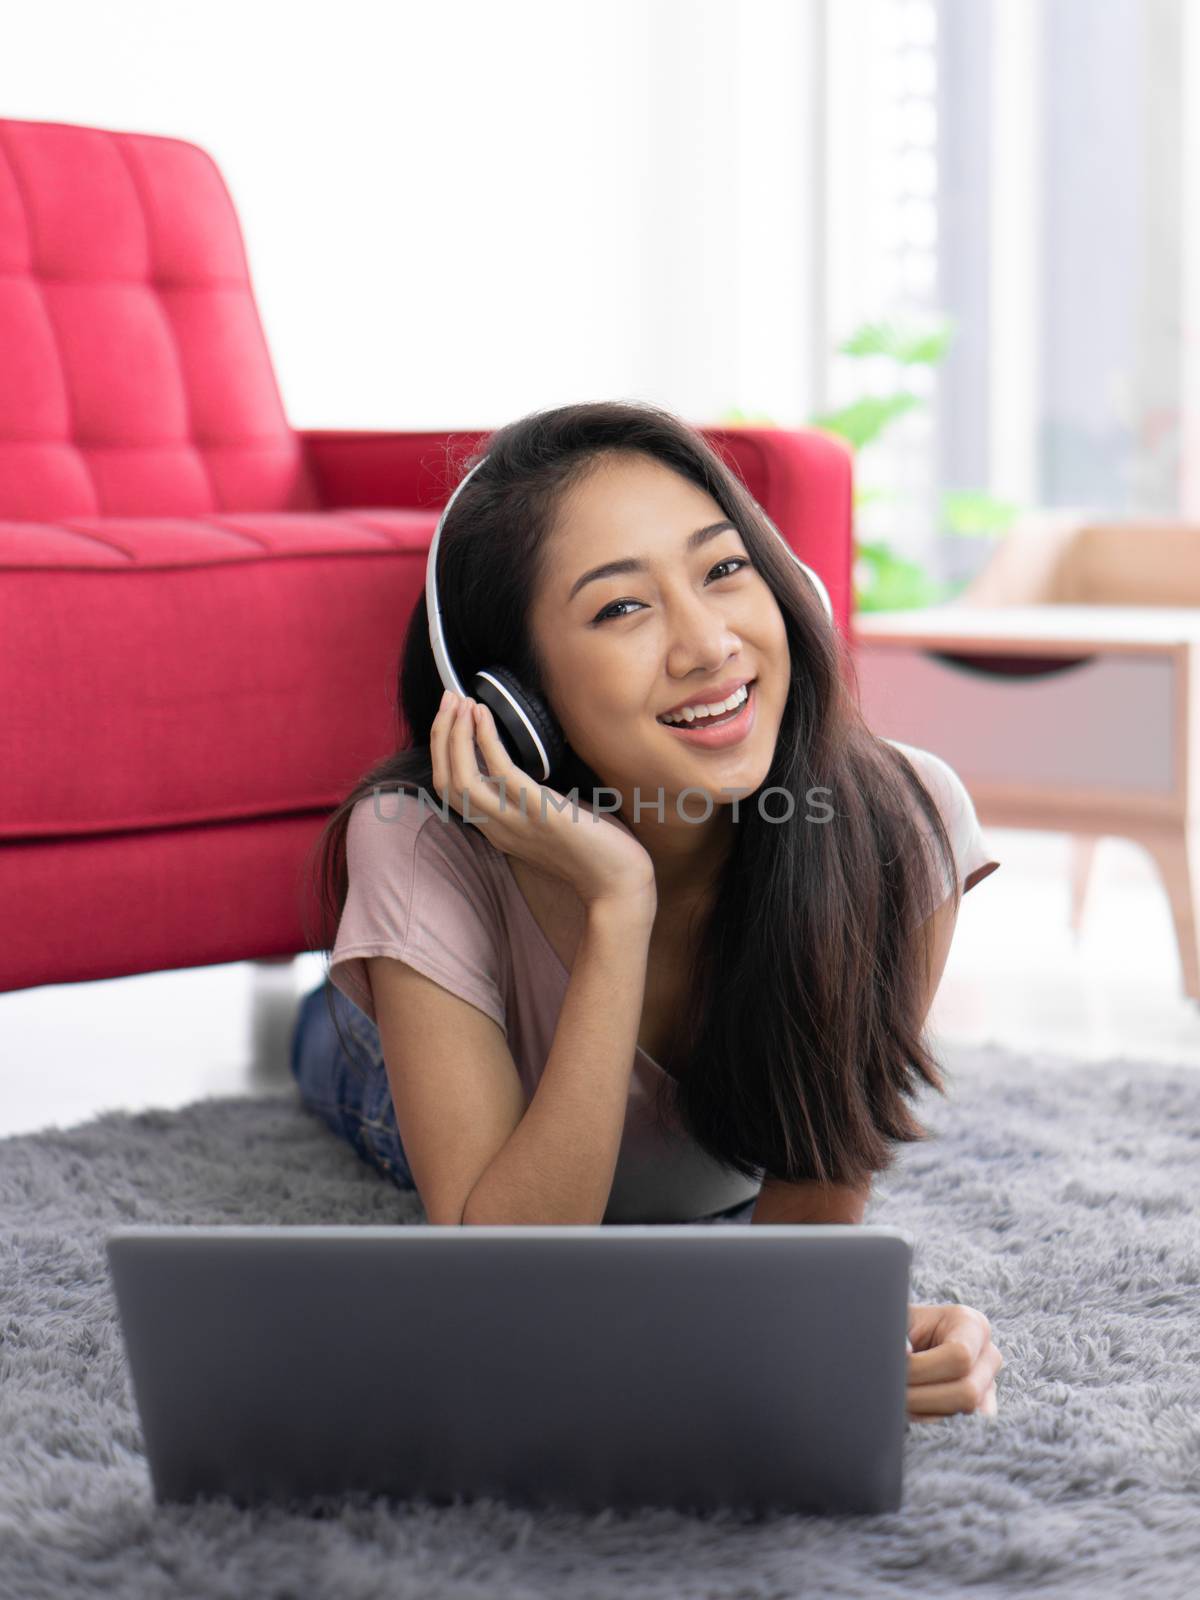 Teen wearing headphones listening to music relax in living room by chadchai_k